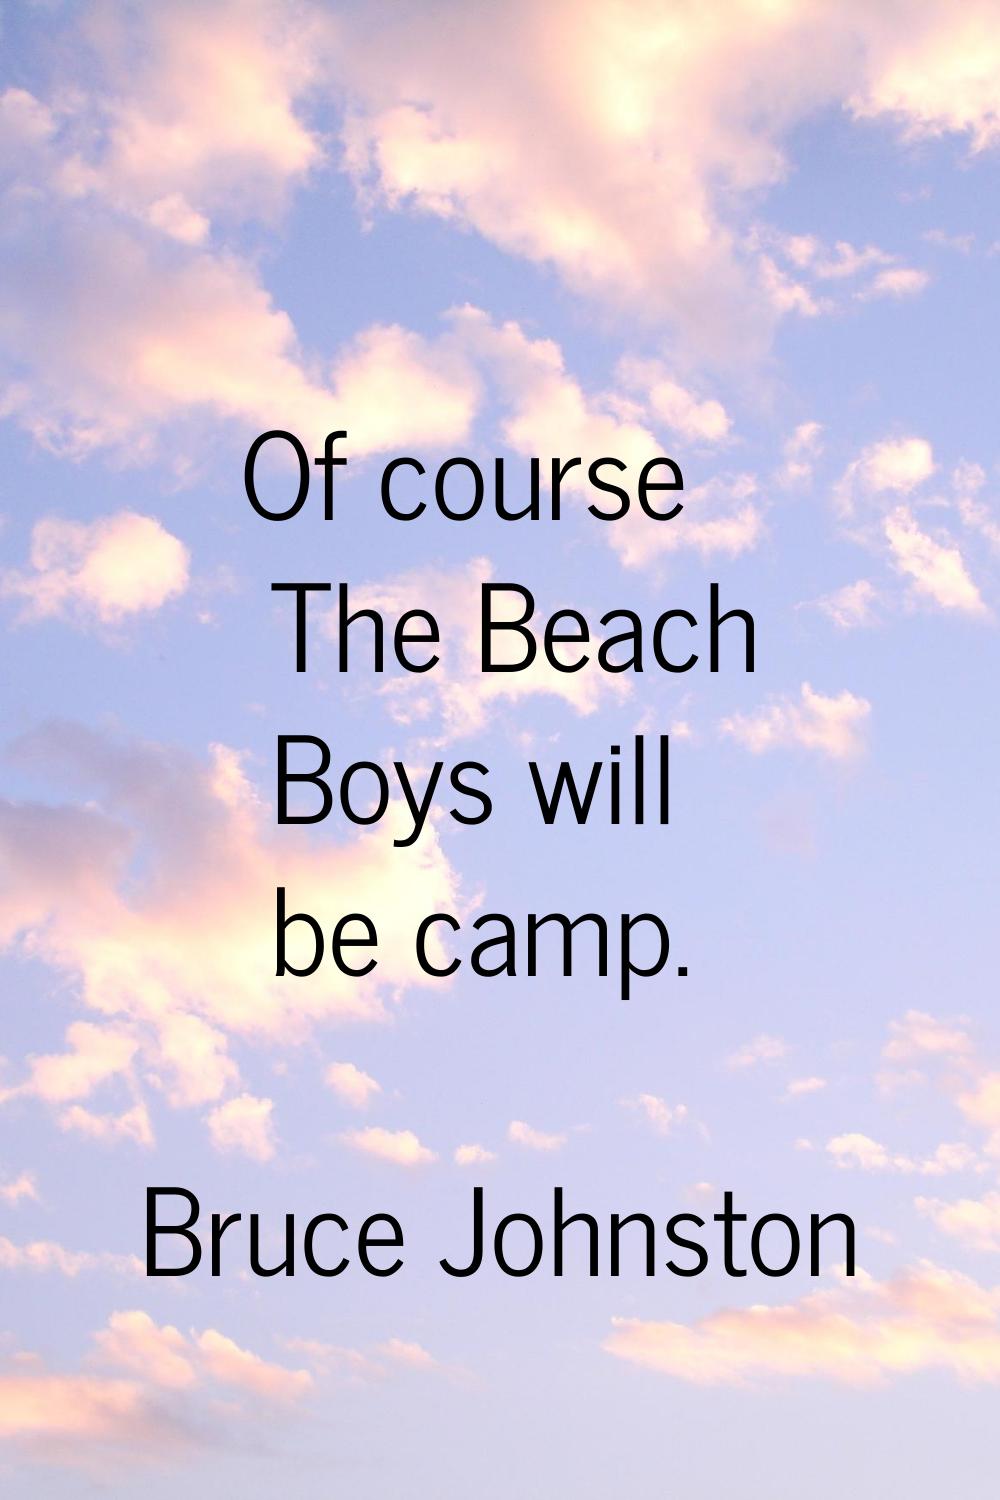 Of course The Beach Boys will be camp.